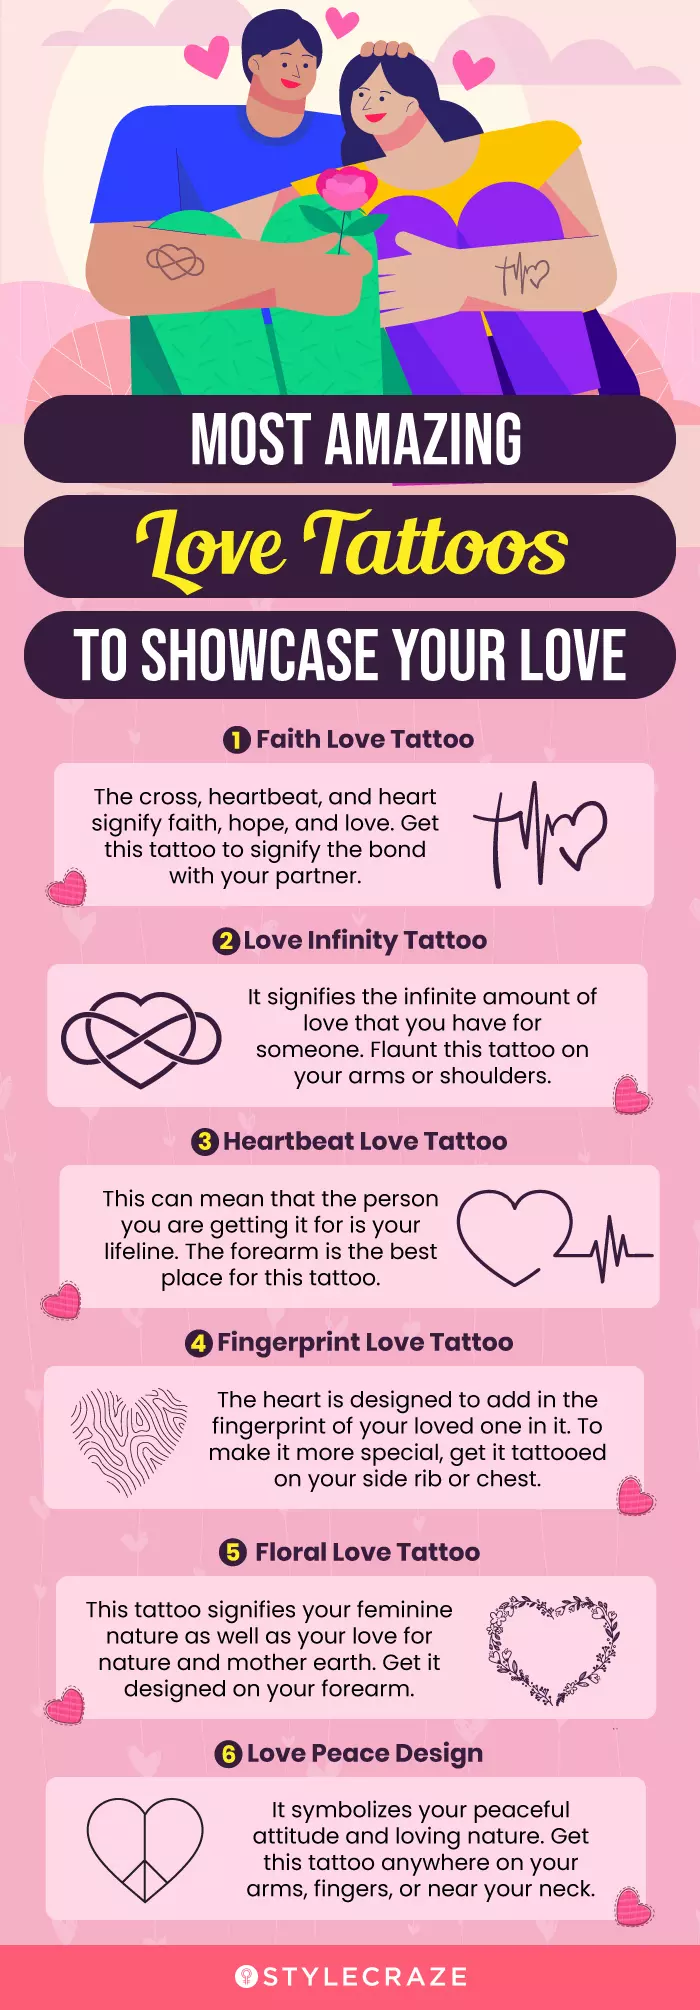 most amazing love tattoos to showcase your love (infographic)